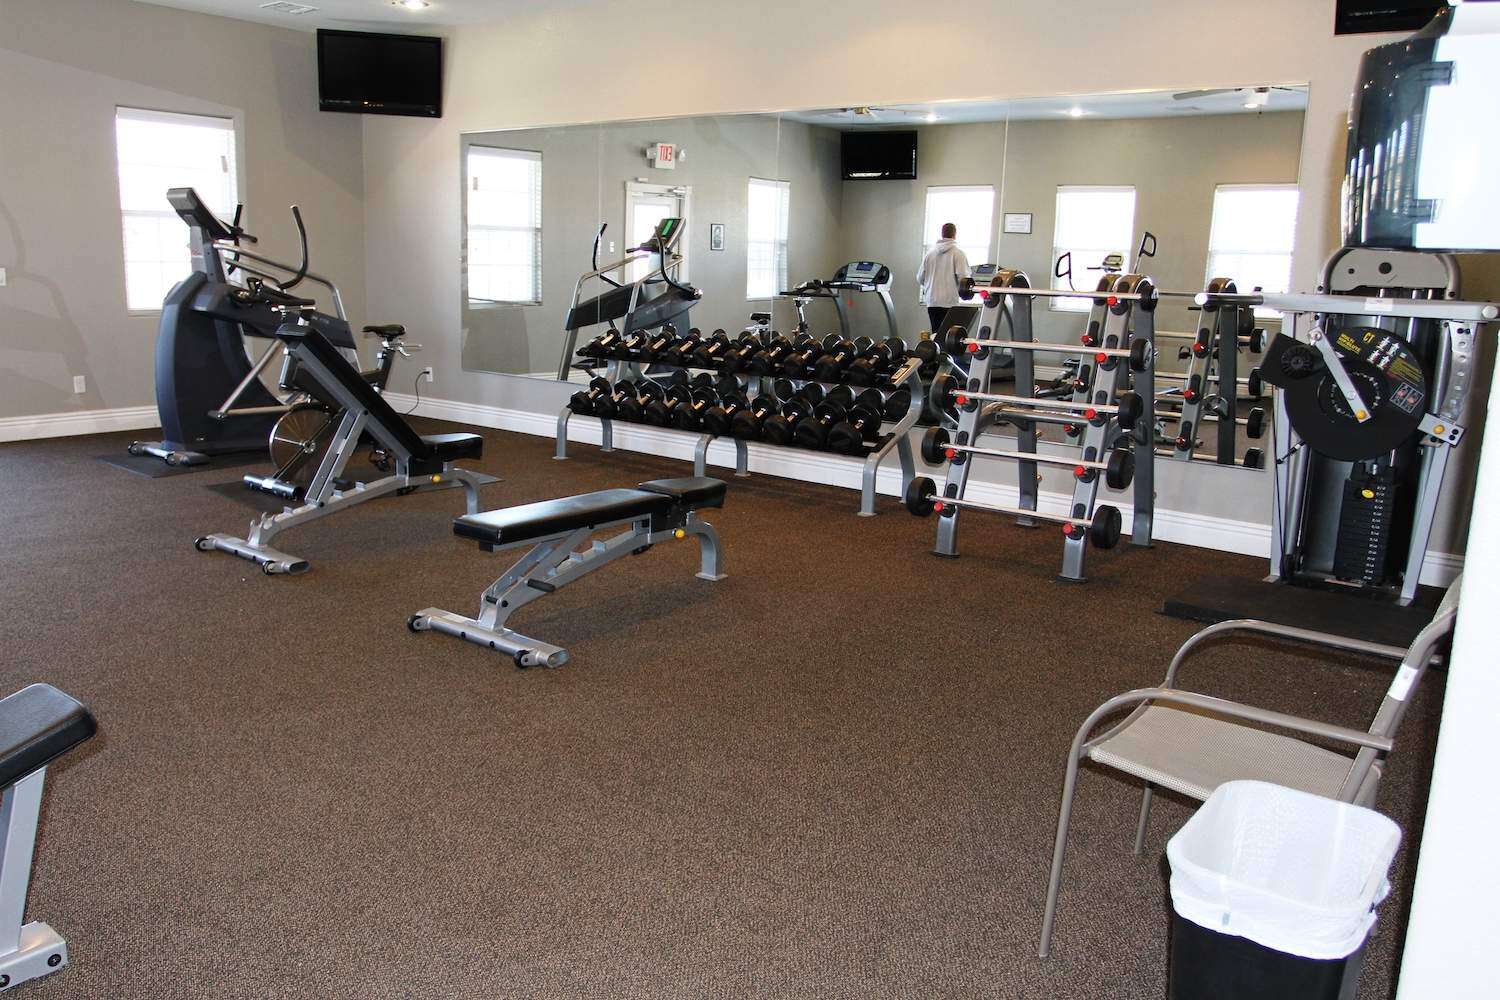 Fitness Center Equipment Available to Residents of Pines at Southridge